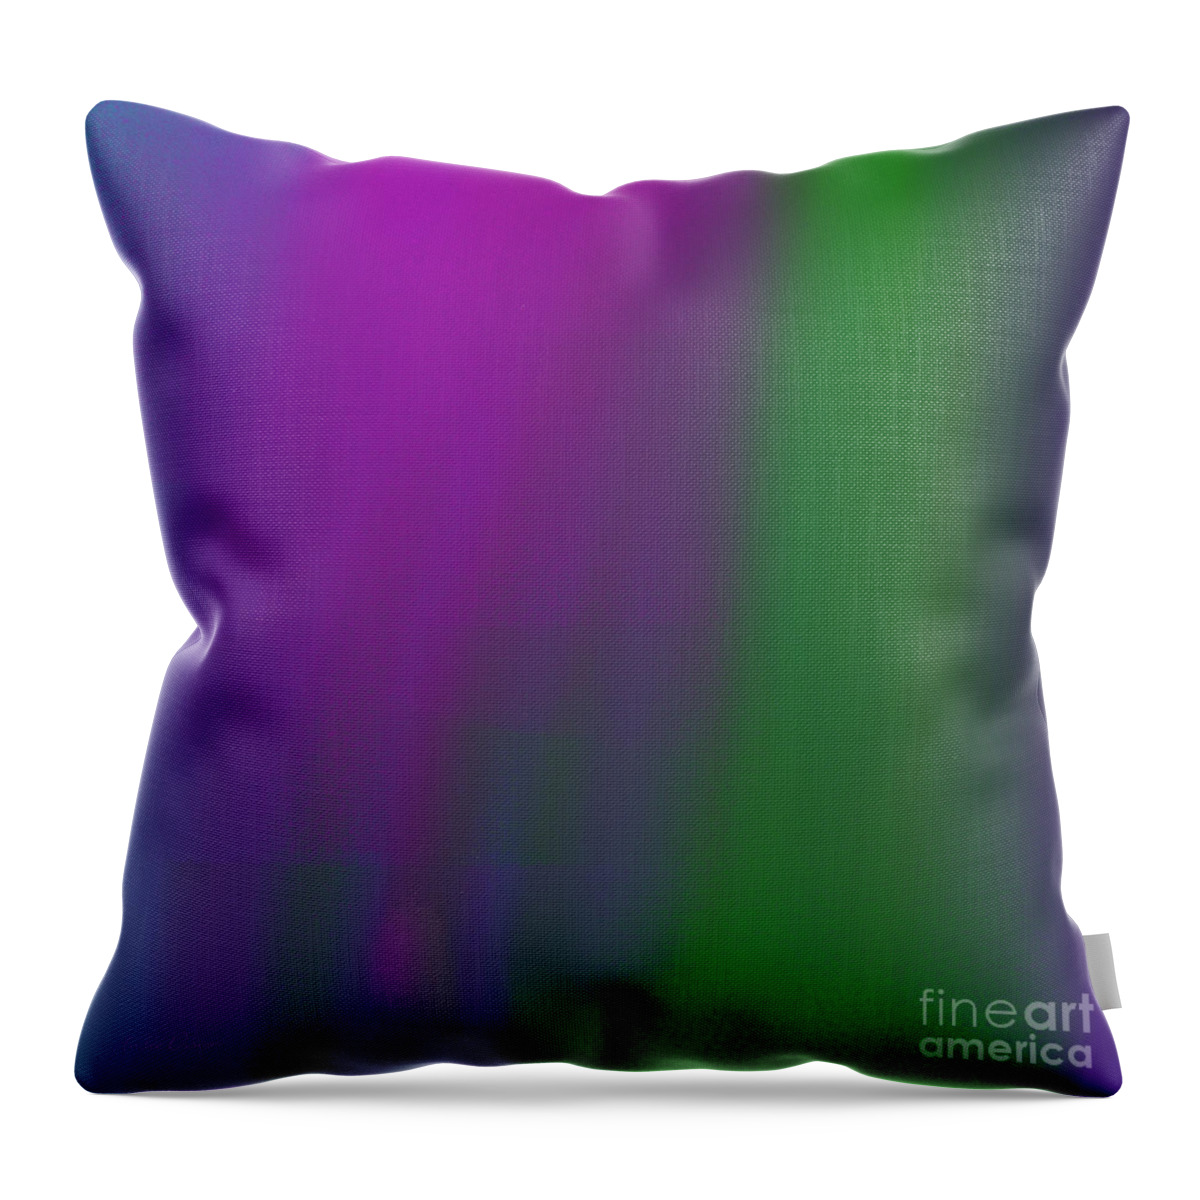 Andee Design Abstract Throw Pillow featuring the digital art The Vineyard 1 Abstract Square by Andee Design